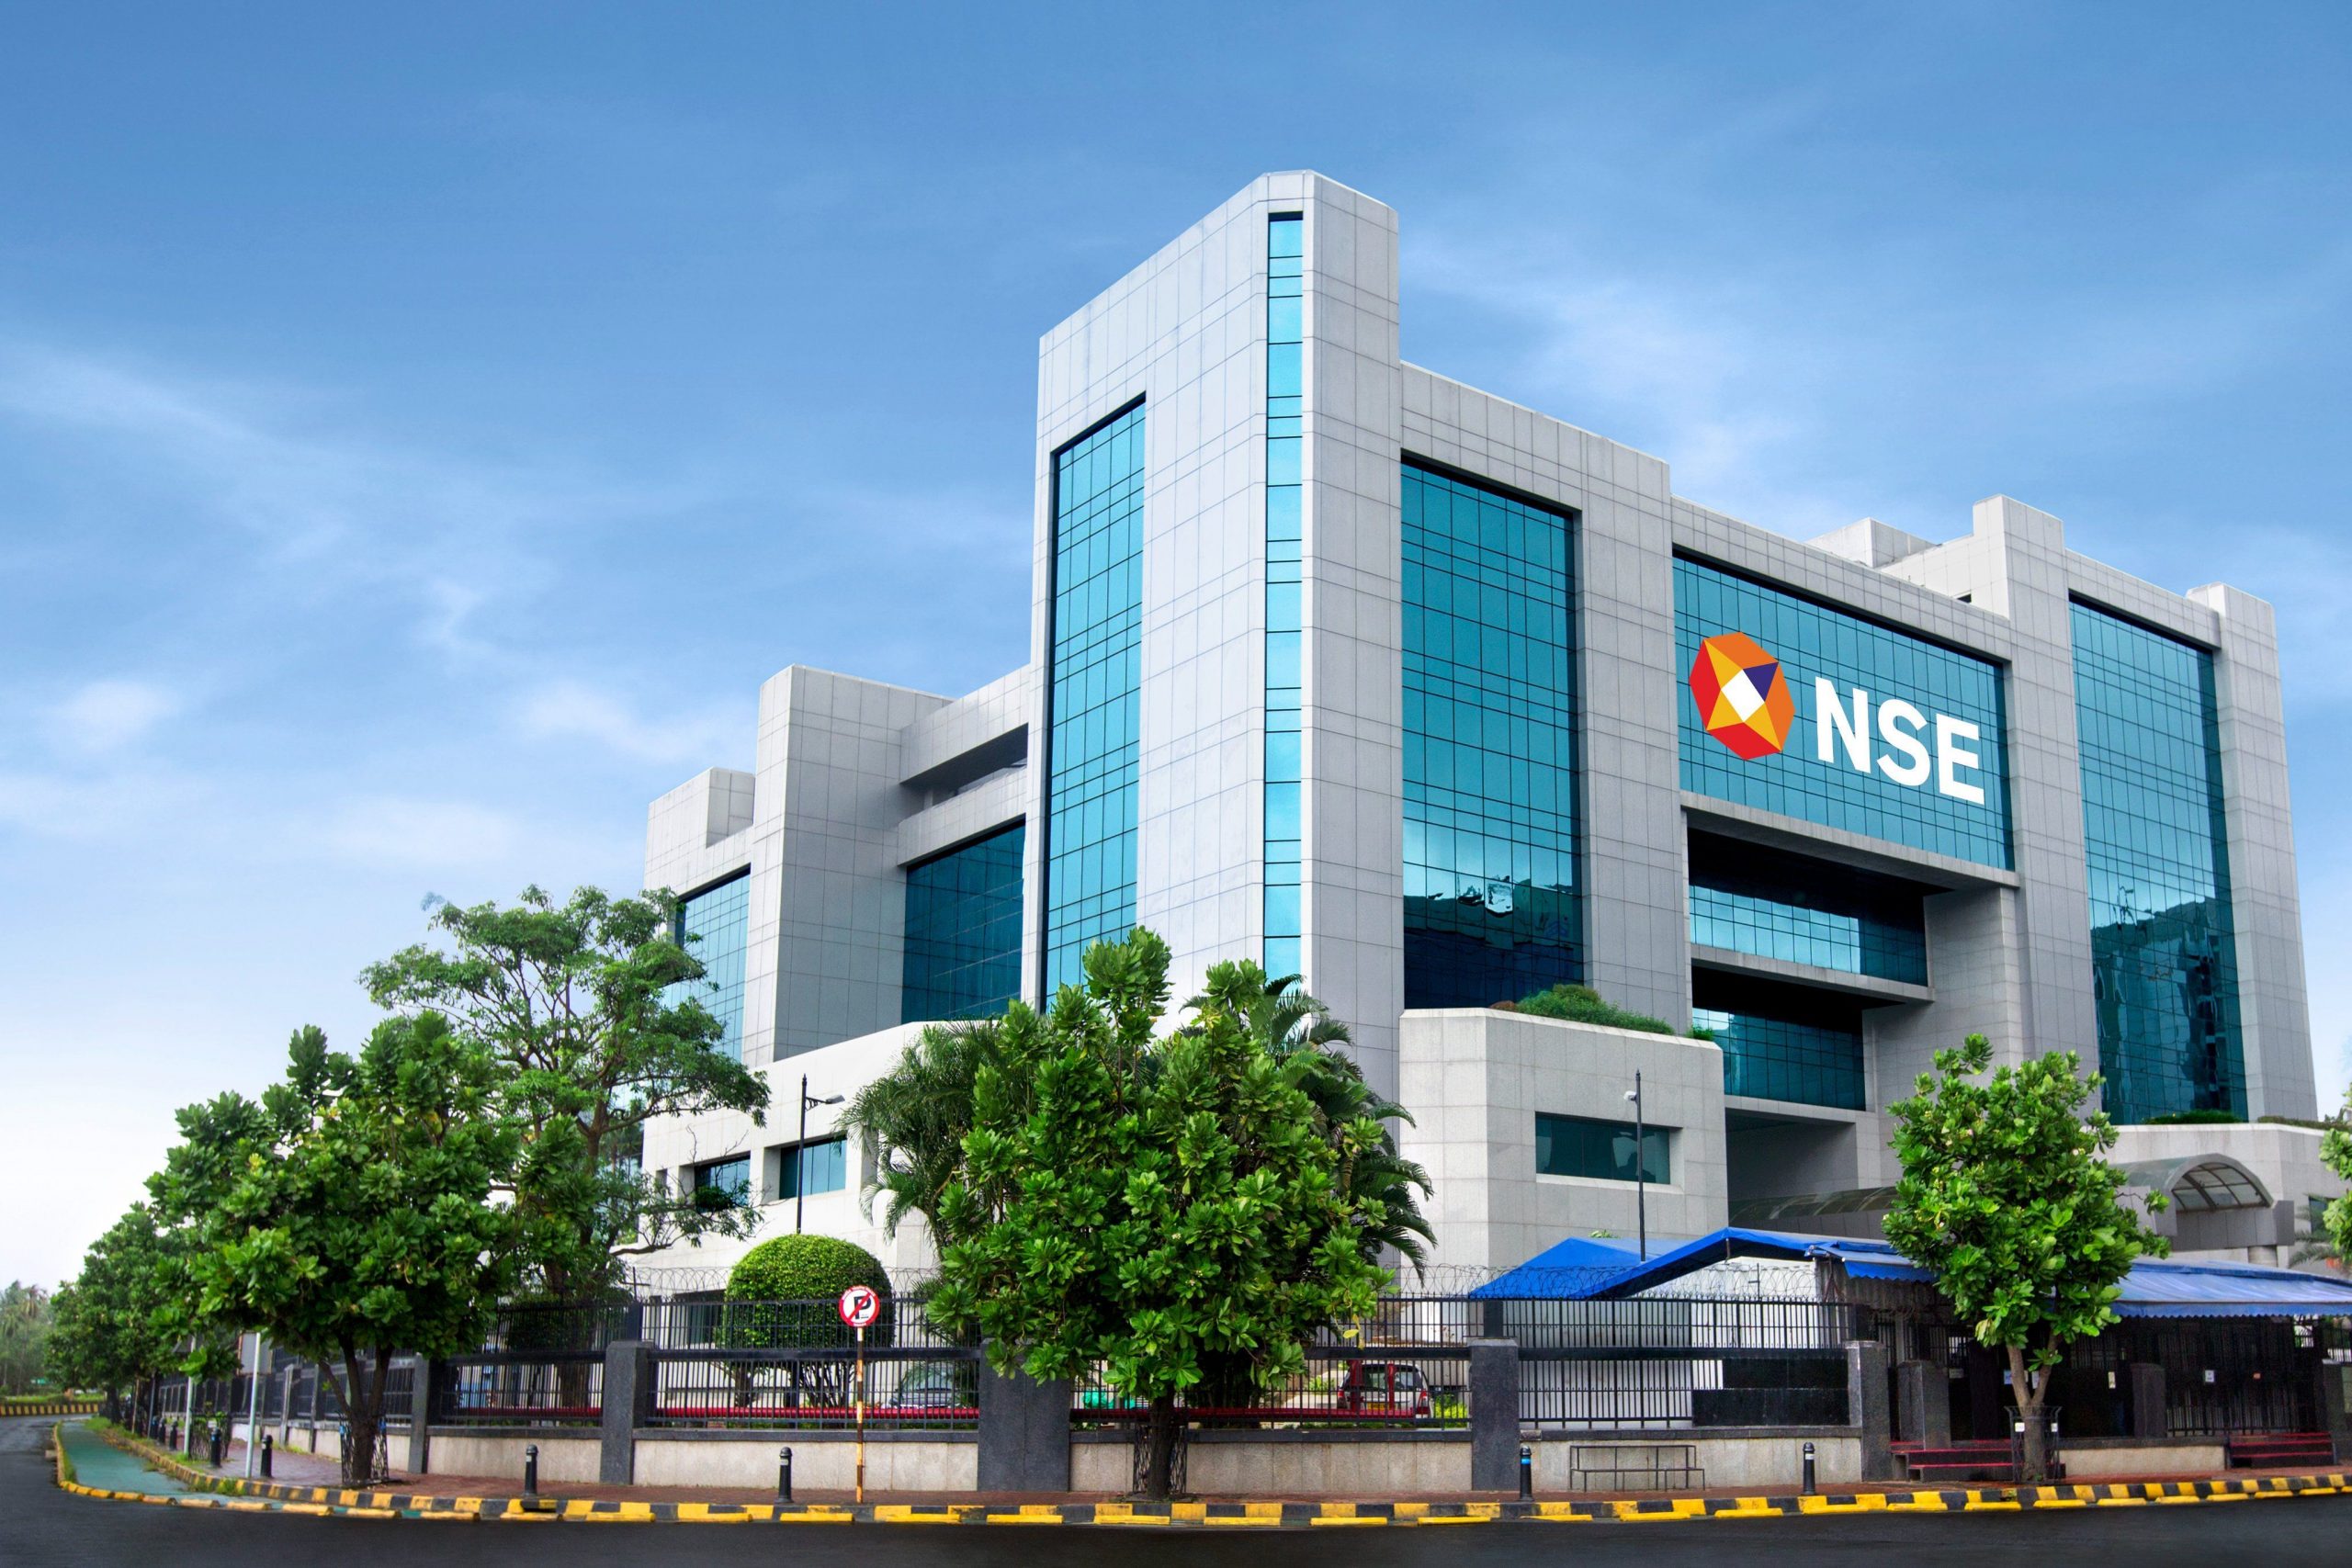 NSE F&O Ban: No stock has been put under ban on Monday, August 29, 2022